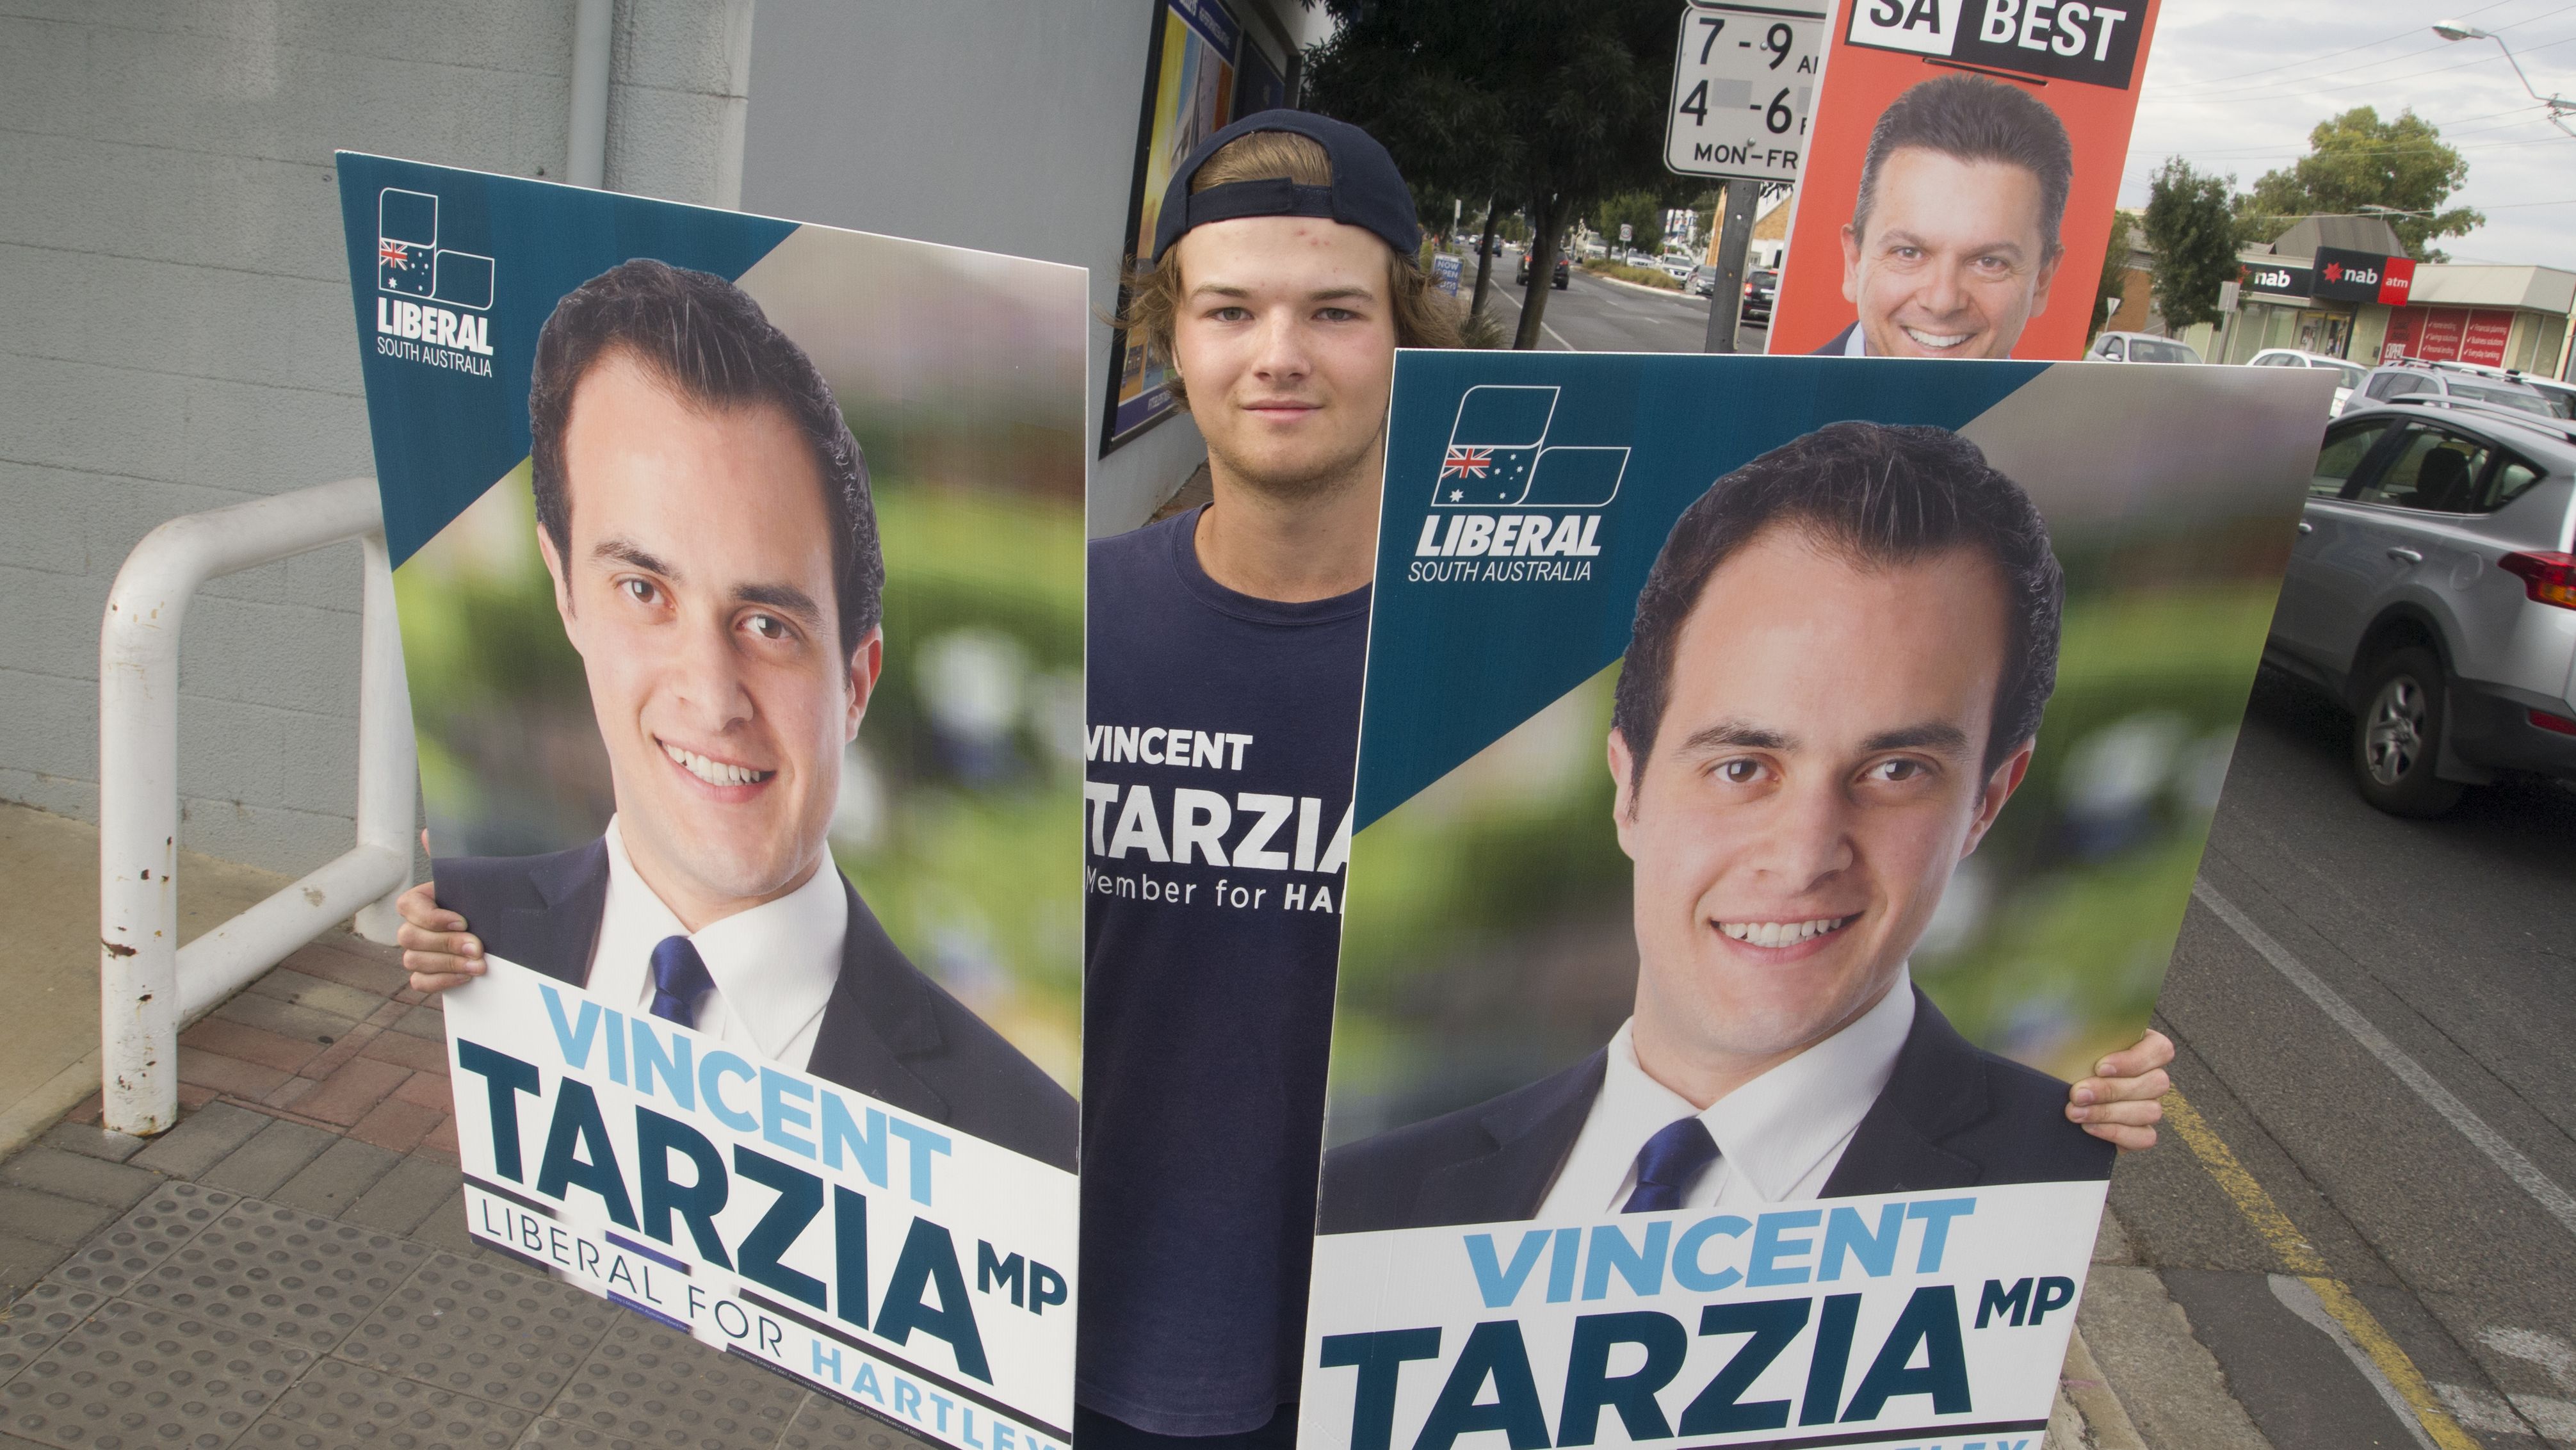 A campaign volunteer holds signs for the Liberal candidate for Hartley, who's running against Nick Xenophon from SA Best.